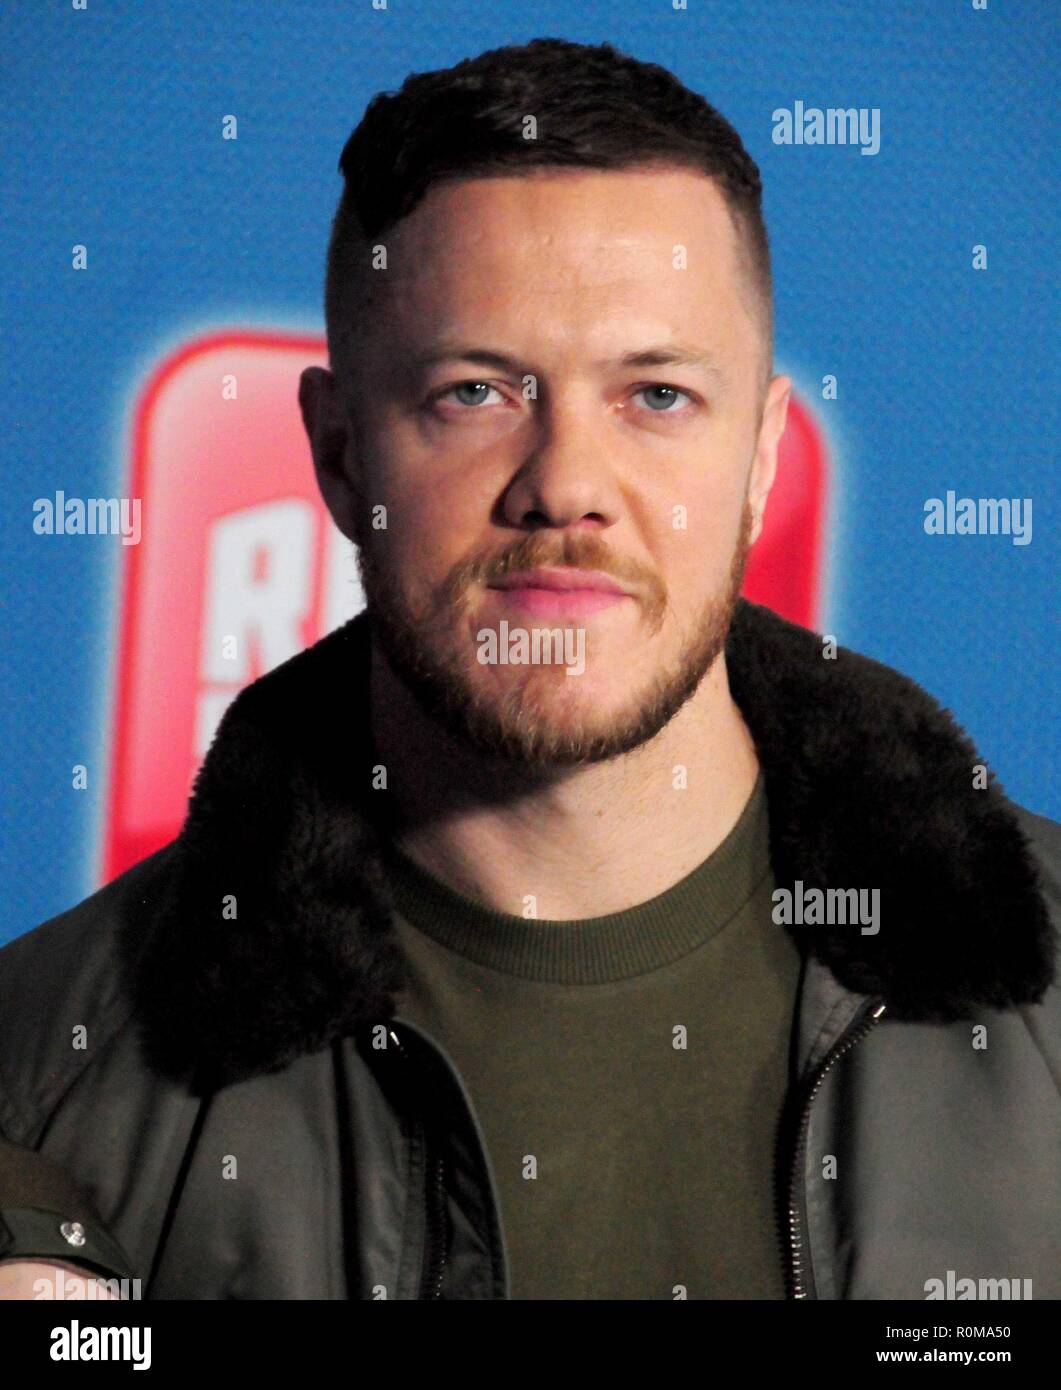 Los Angeles, USA. 5th Nov 2018. Singer/musician Dan Reynolds of Imagine Dragons attends Walt Disney Animation's' 'Ralph Breaks The Internet' World Premiere on November 5, 2018 at El Capitan Theatre in Los Angeles, California. Photo by Barry King/Alamy Live News Stock Photo